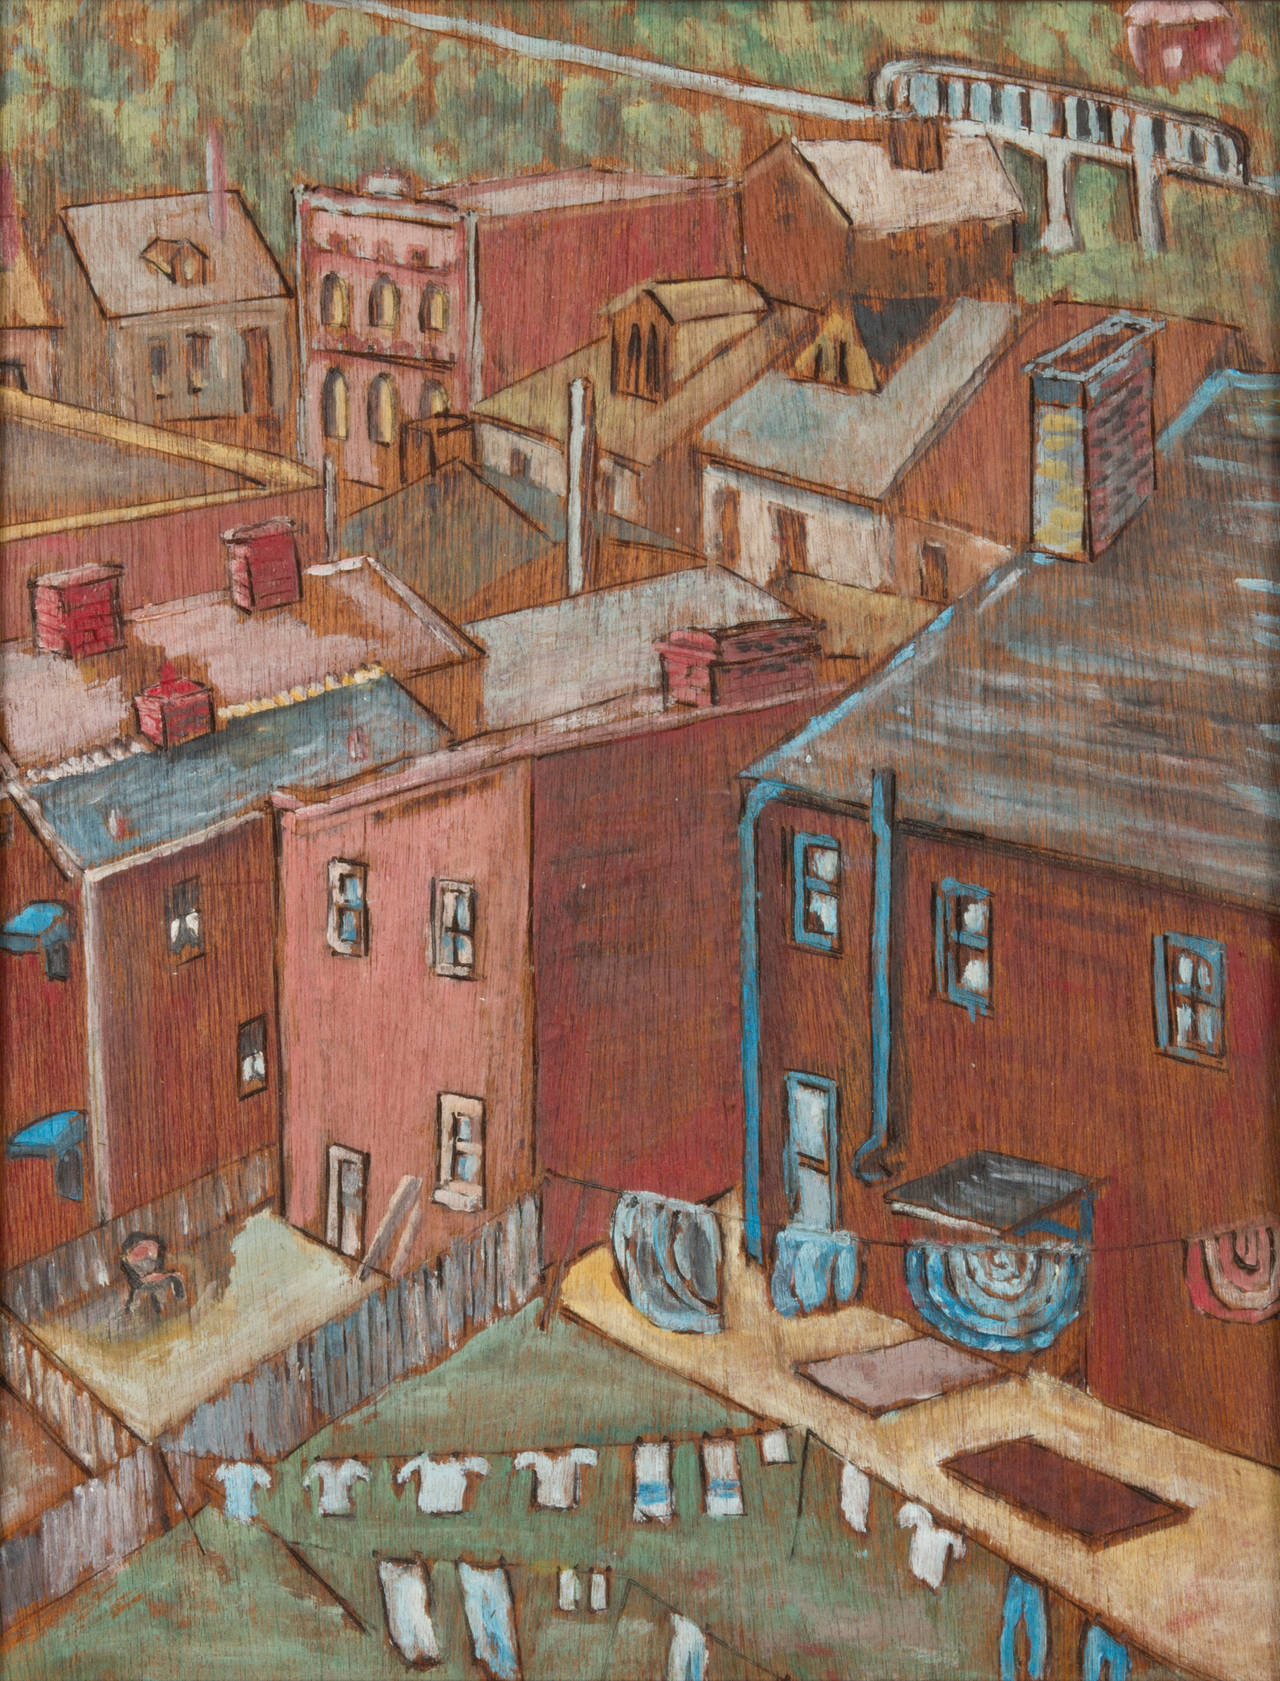 A charming cityscape etched in wood and painted is attributed to the Czech Artist Jan Benda. Showing a slice of urban life in the 1940s-1950s, the picture outside of its frame measures 10.25